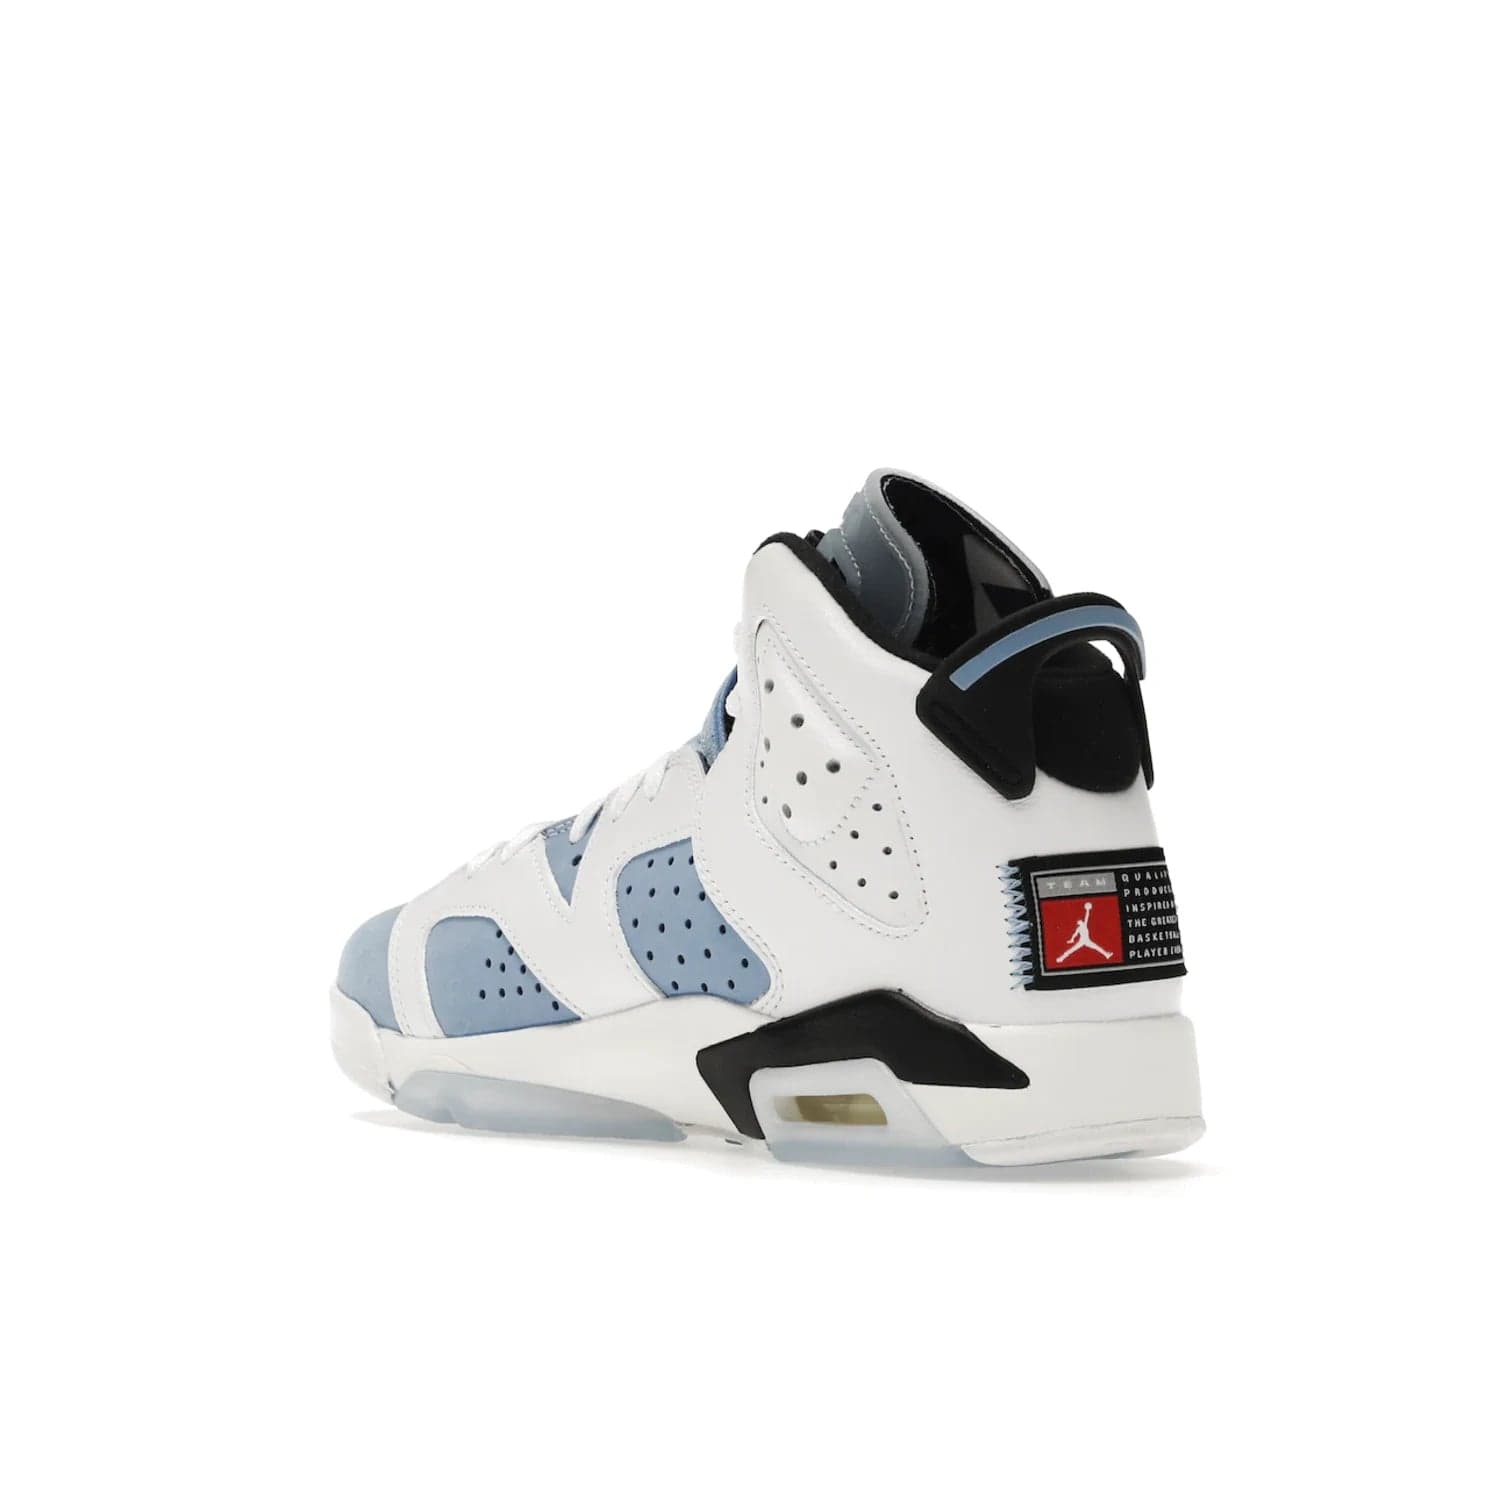 Jordan 6 Retro UNC White (GS) - Image 24 - Only at www.BallersClubKickz.com - Air Jordan 6 Retro UNC White GS: Michael Jordan alma mater, UNC Tar Heels, featuring colorway, nubuck, leather, Jumpman branding and a visible Air unit. Translucent blue/white outsole, perfect for completing sneaker rotation.